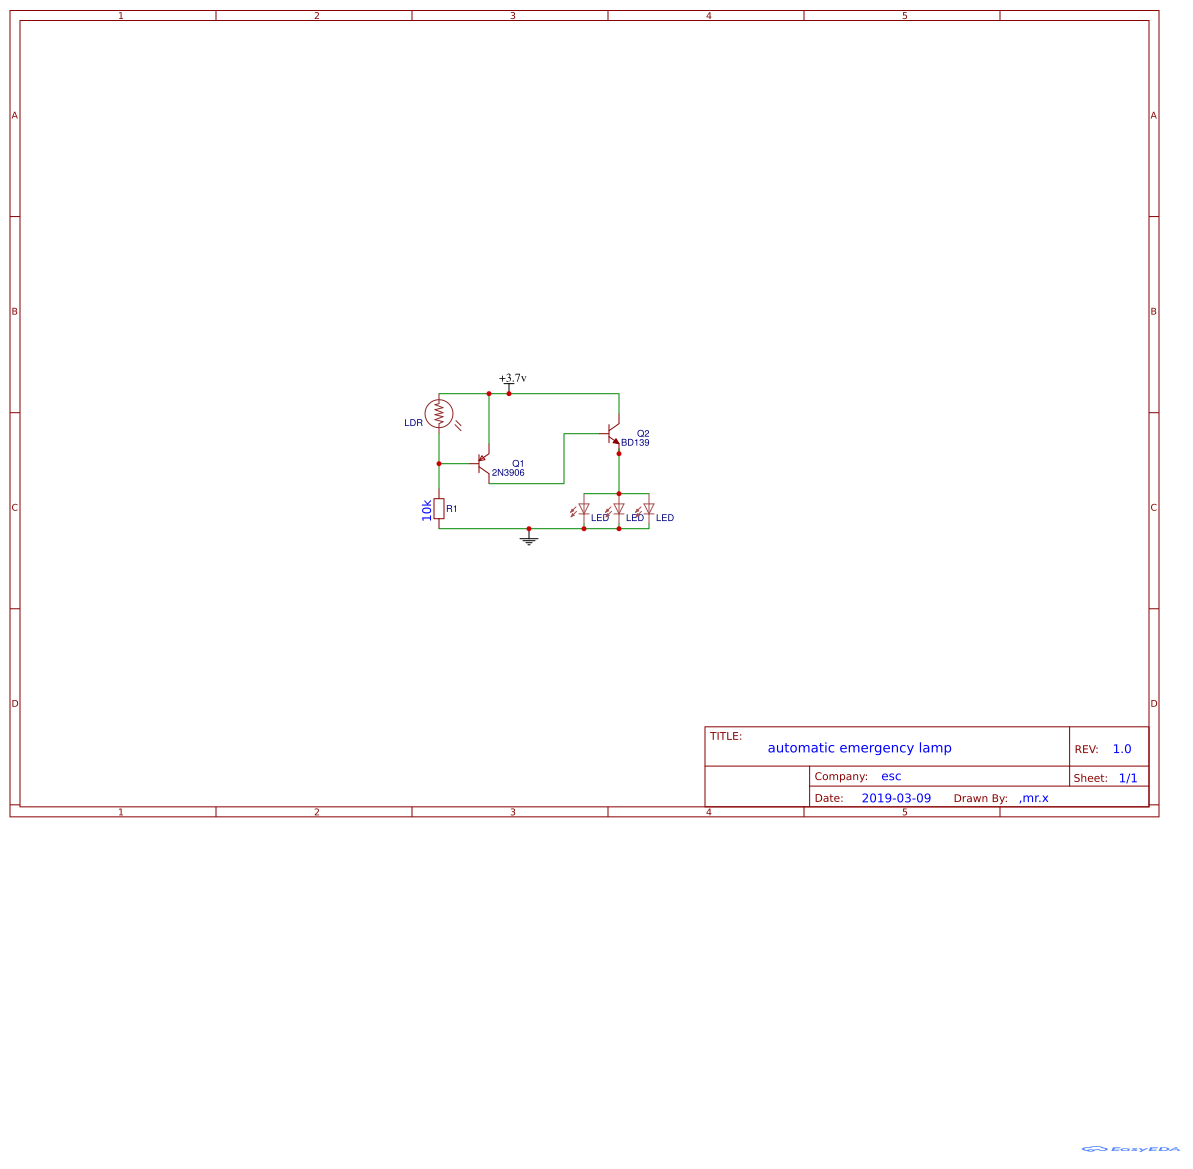 Schematic_emergencylamp_Sheet-1_20190310194221.png